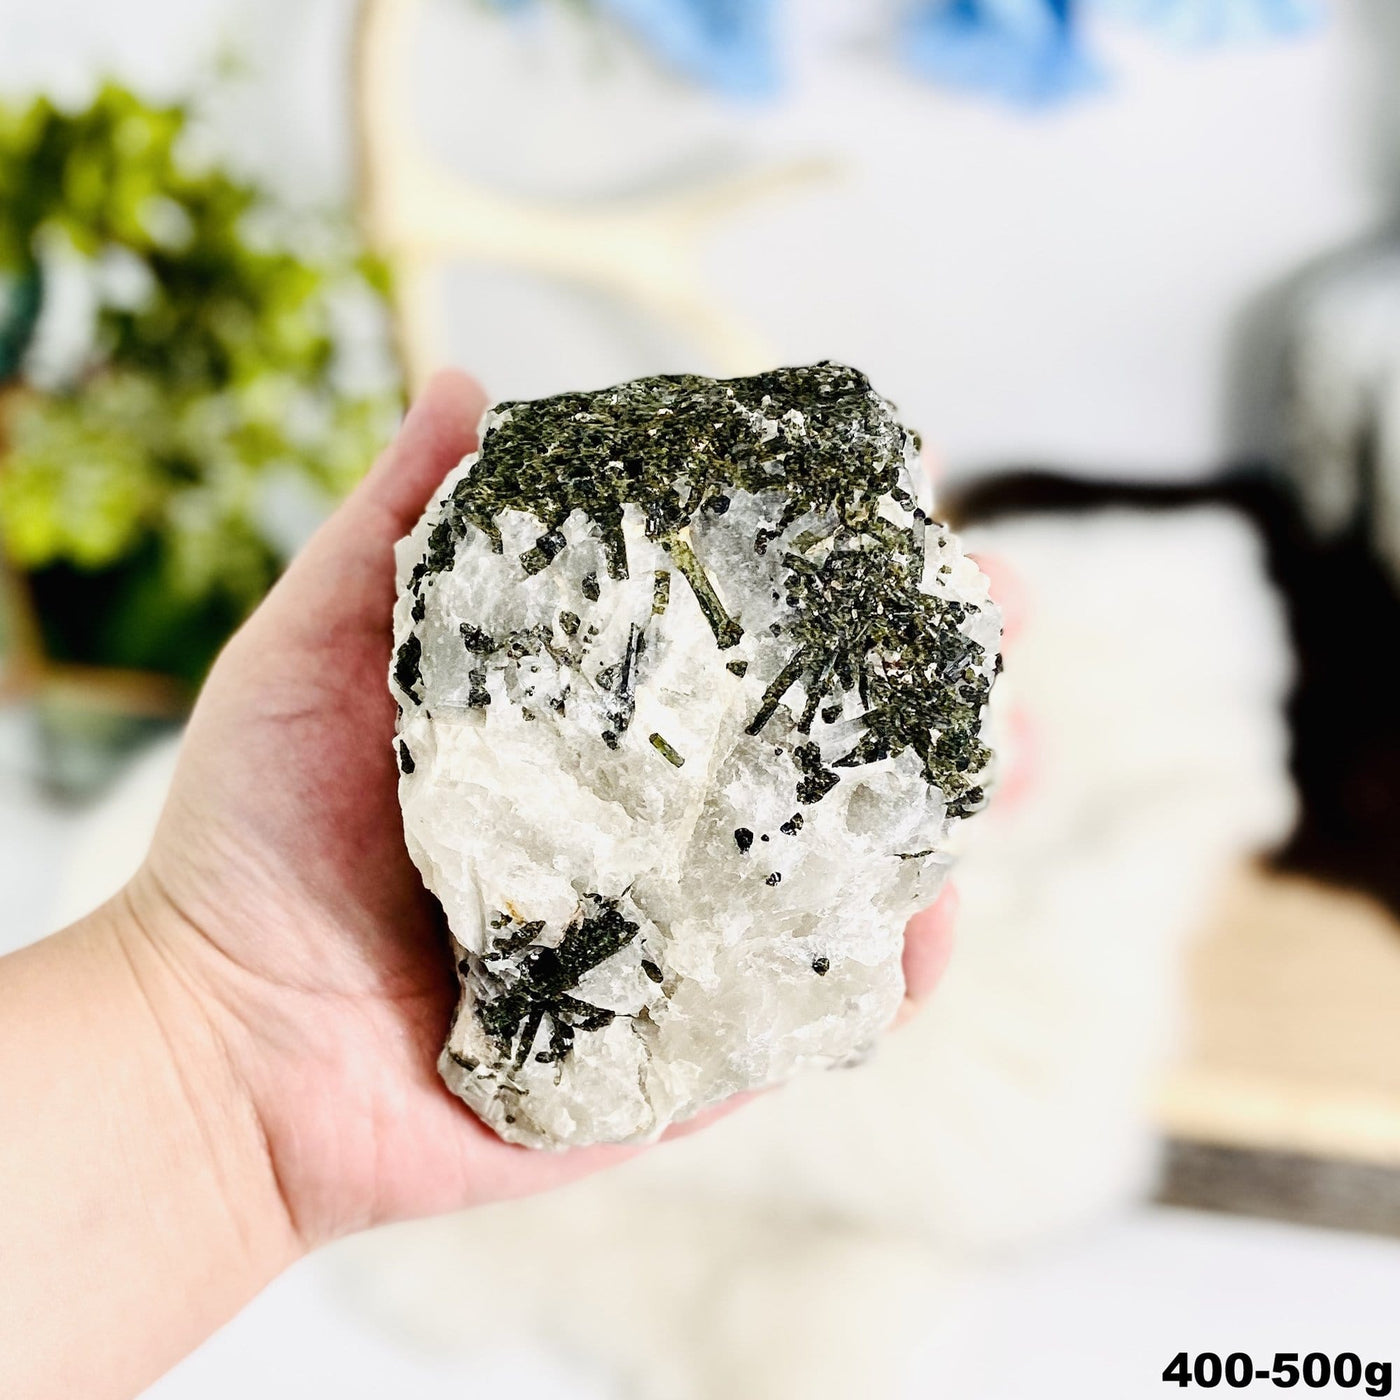 1 piece of Epidote In Quartz Chunk in hand showing the weight 400 to 500 grams on white background.